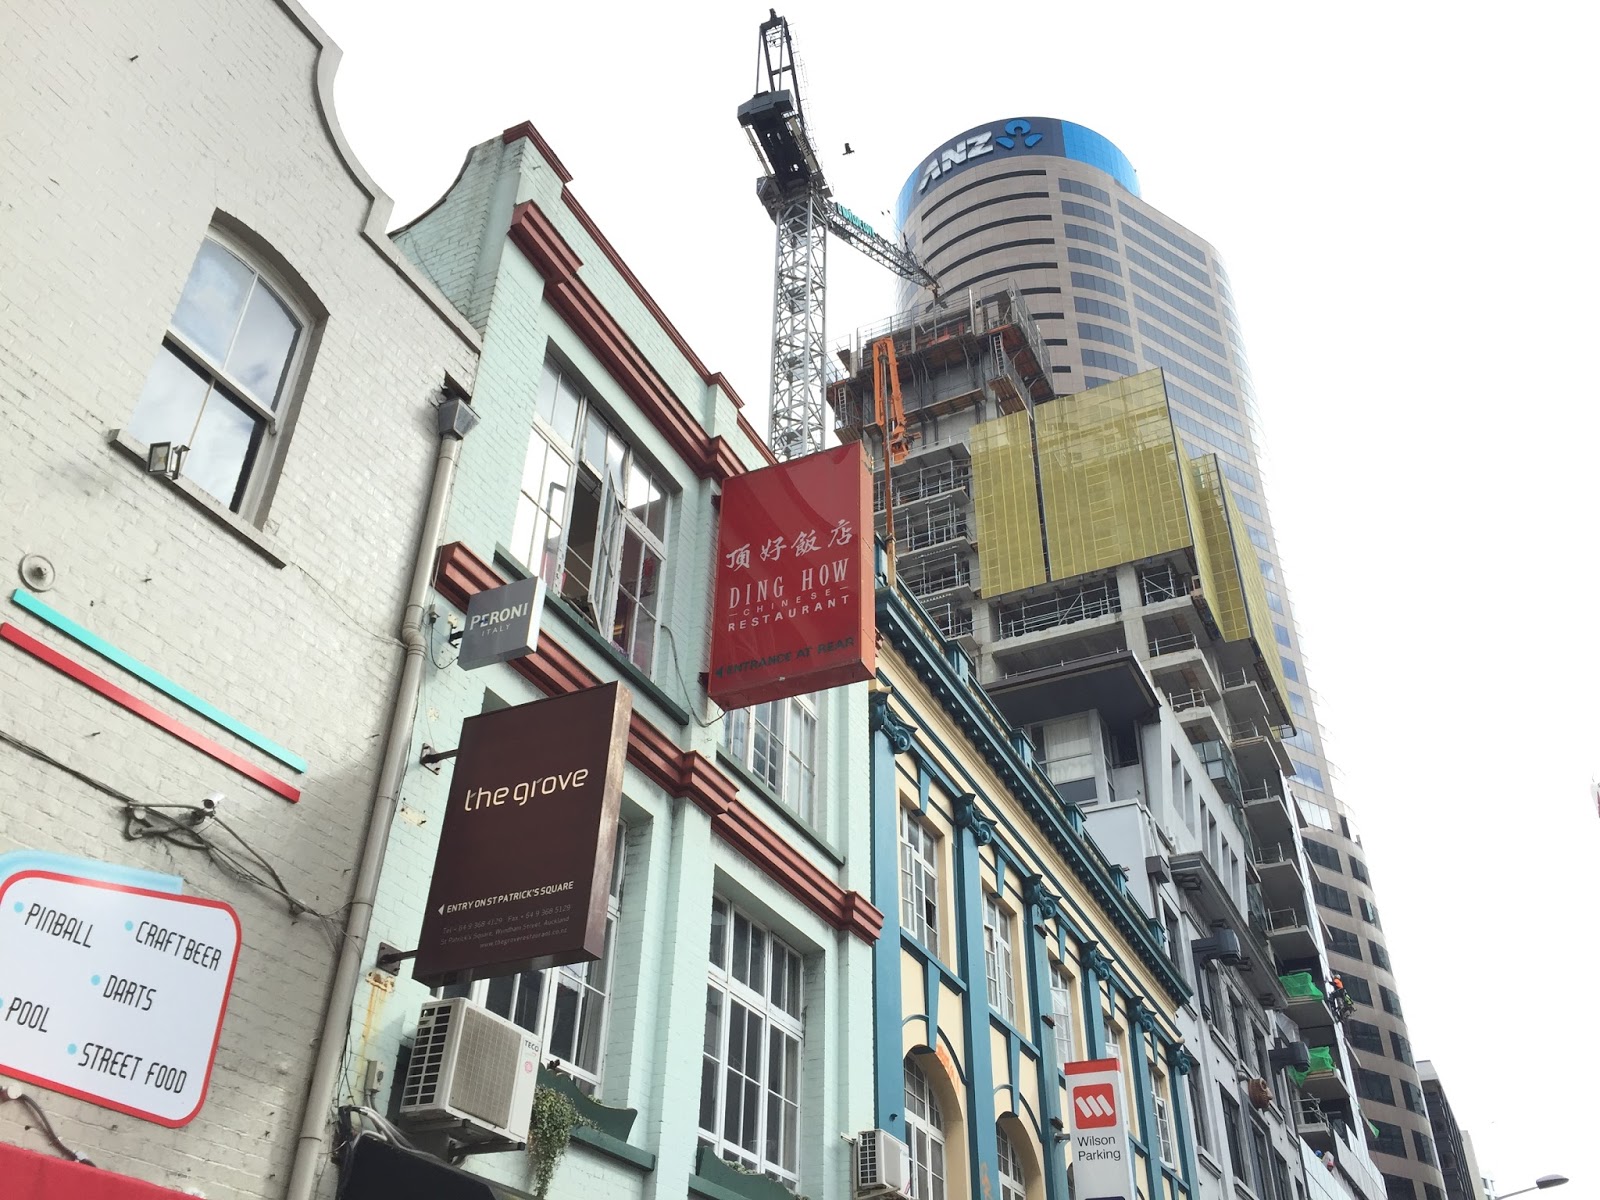 3 Chinese Restaurant Signs that Survived their Closure in Auckland